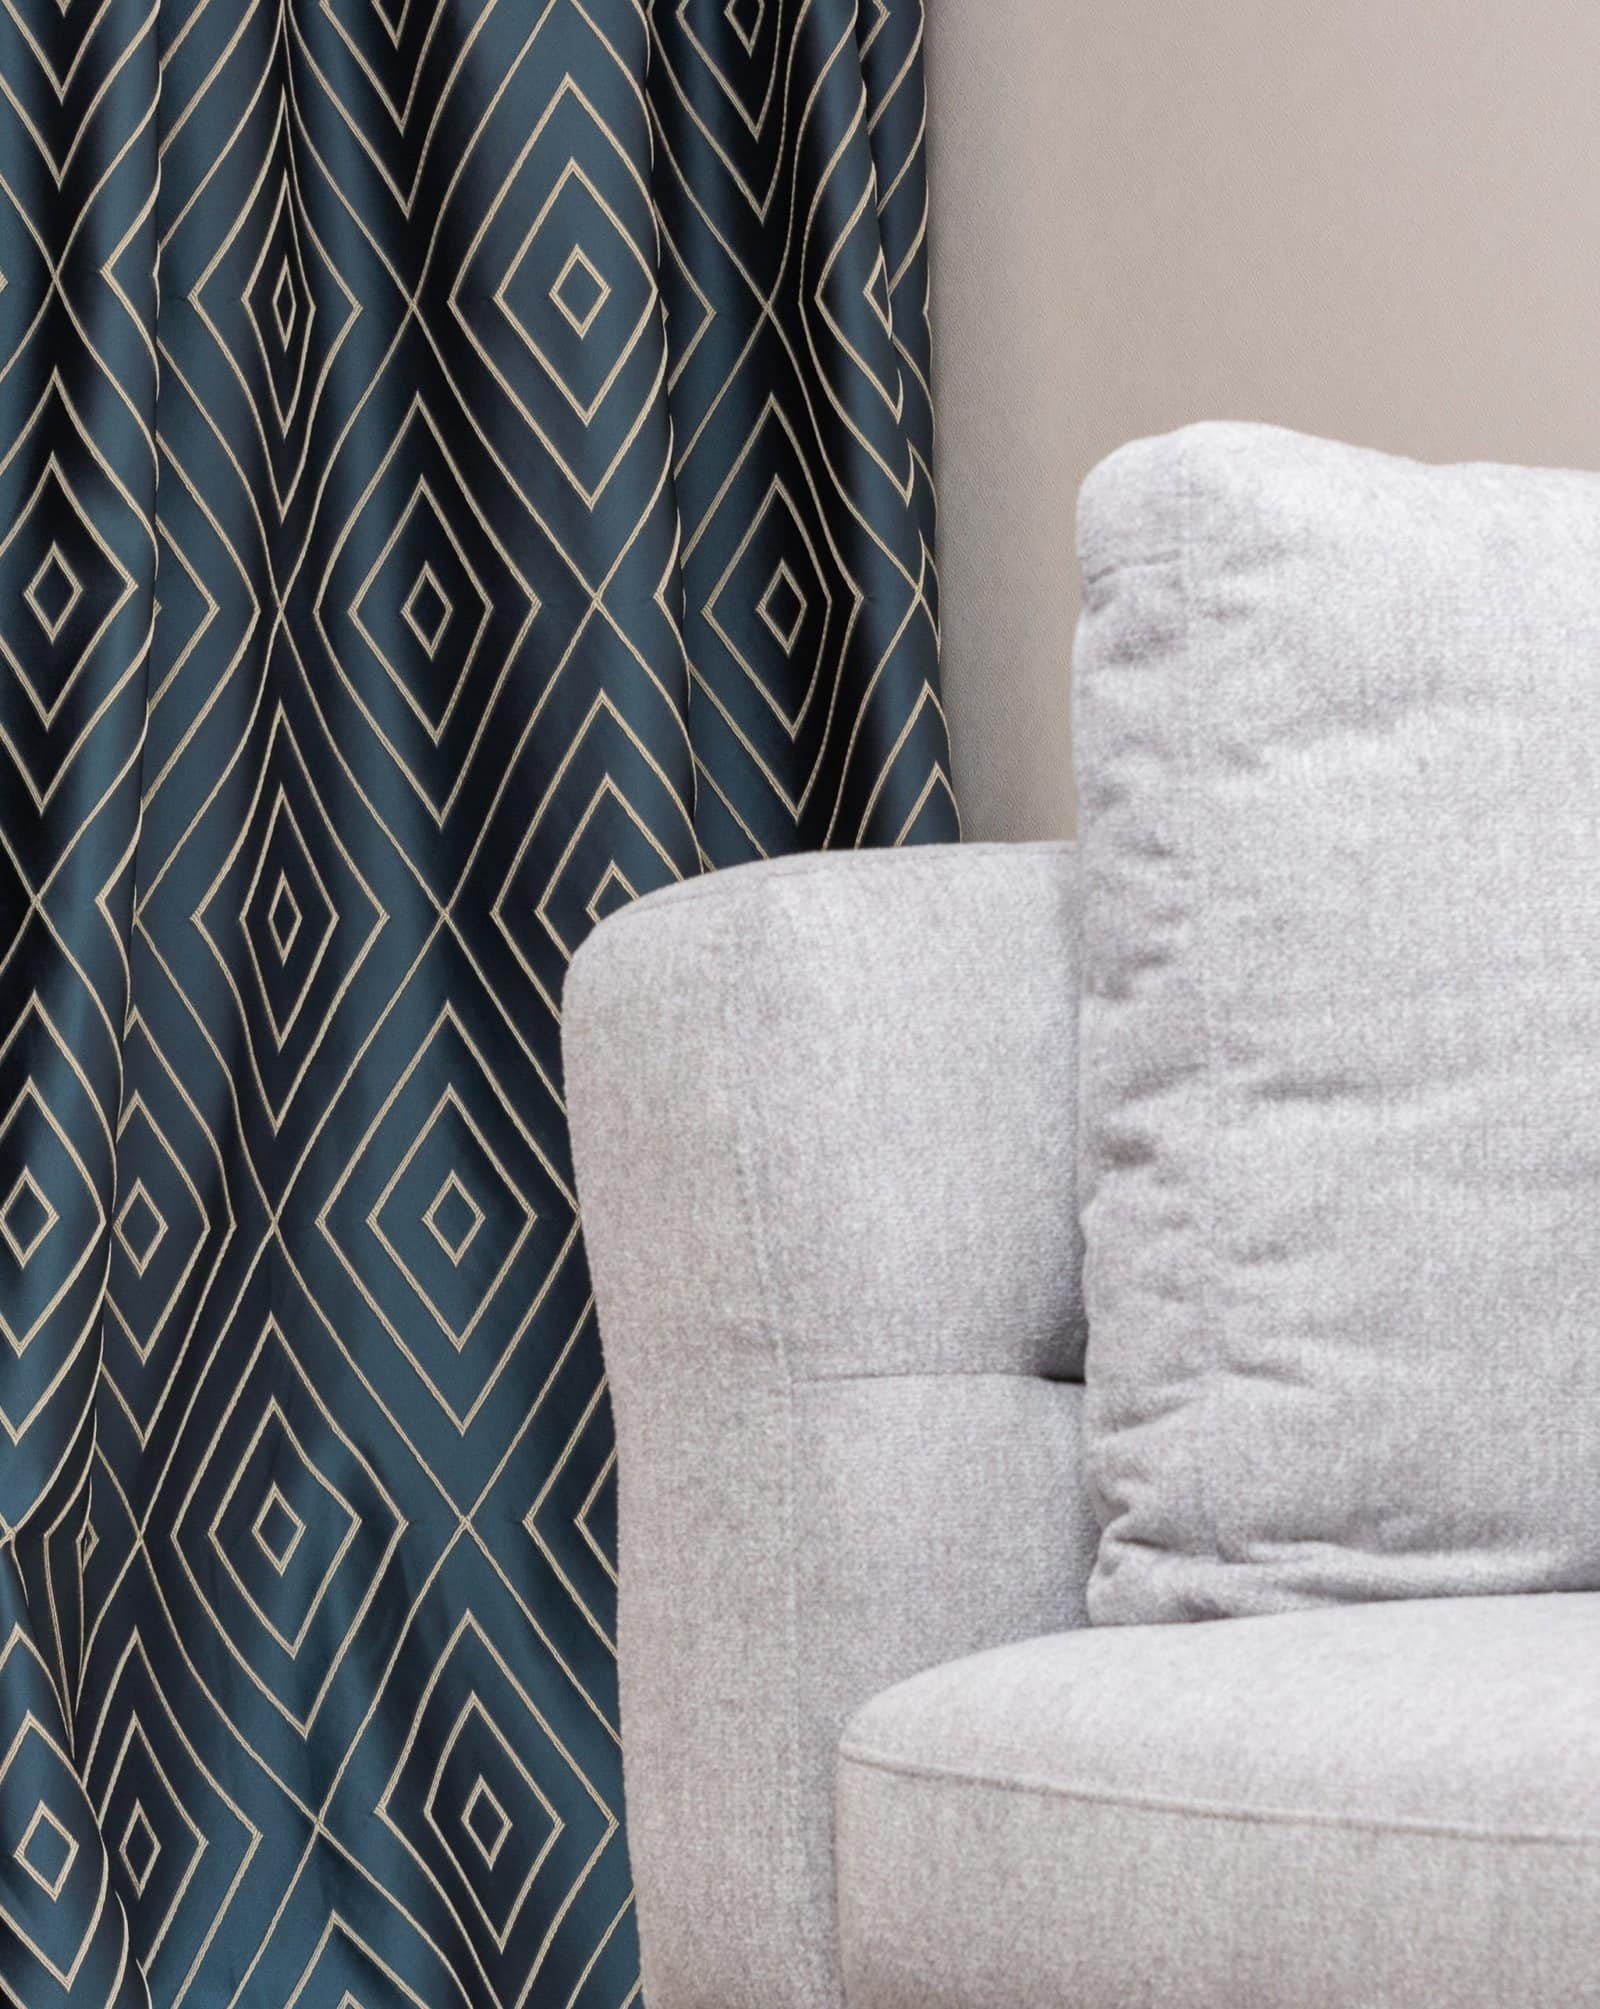  Geometric Patterns Look Great on Curtains scaled